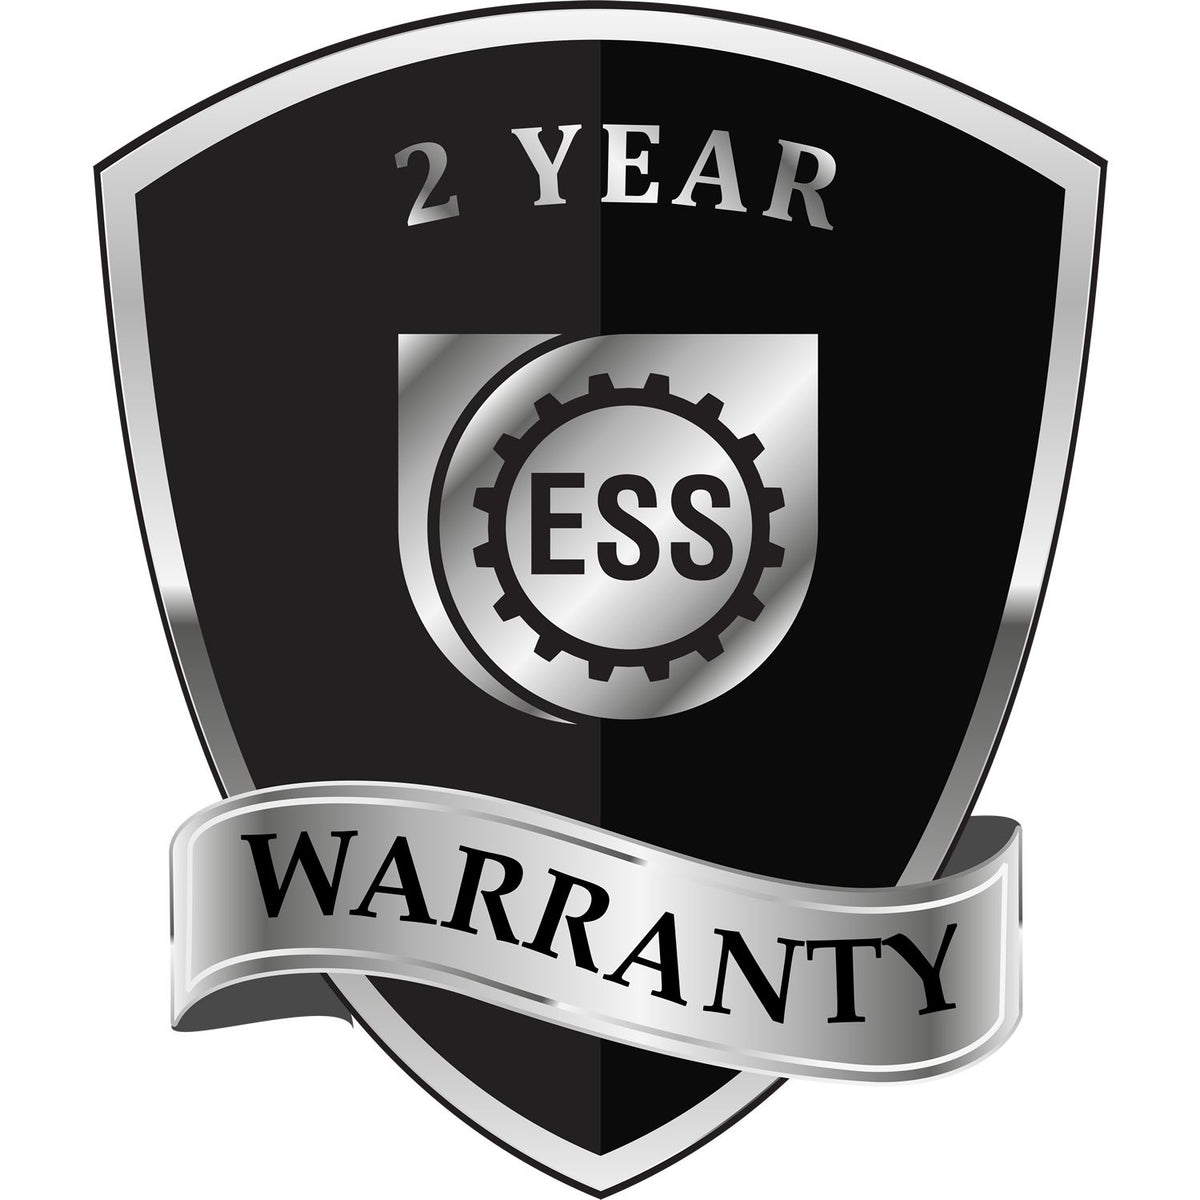 A badge or emblem showing a warranty icon for the Kentucky Desk Architect Embossing Seal